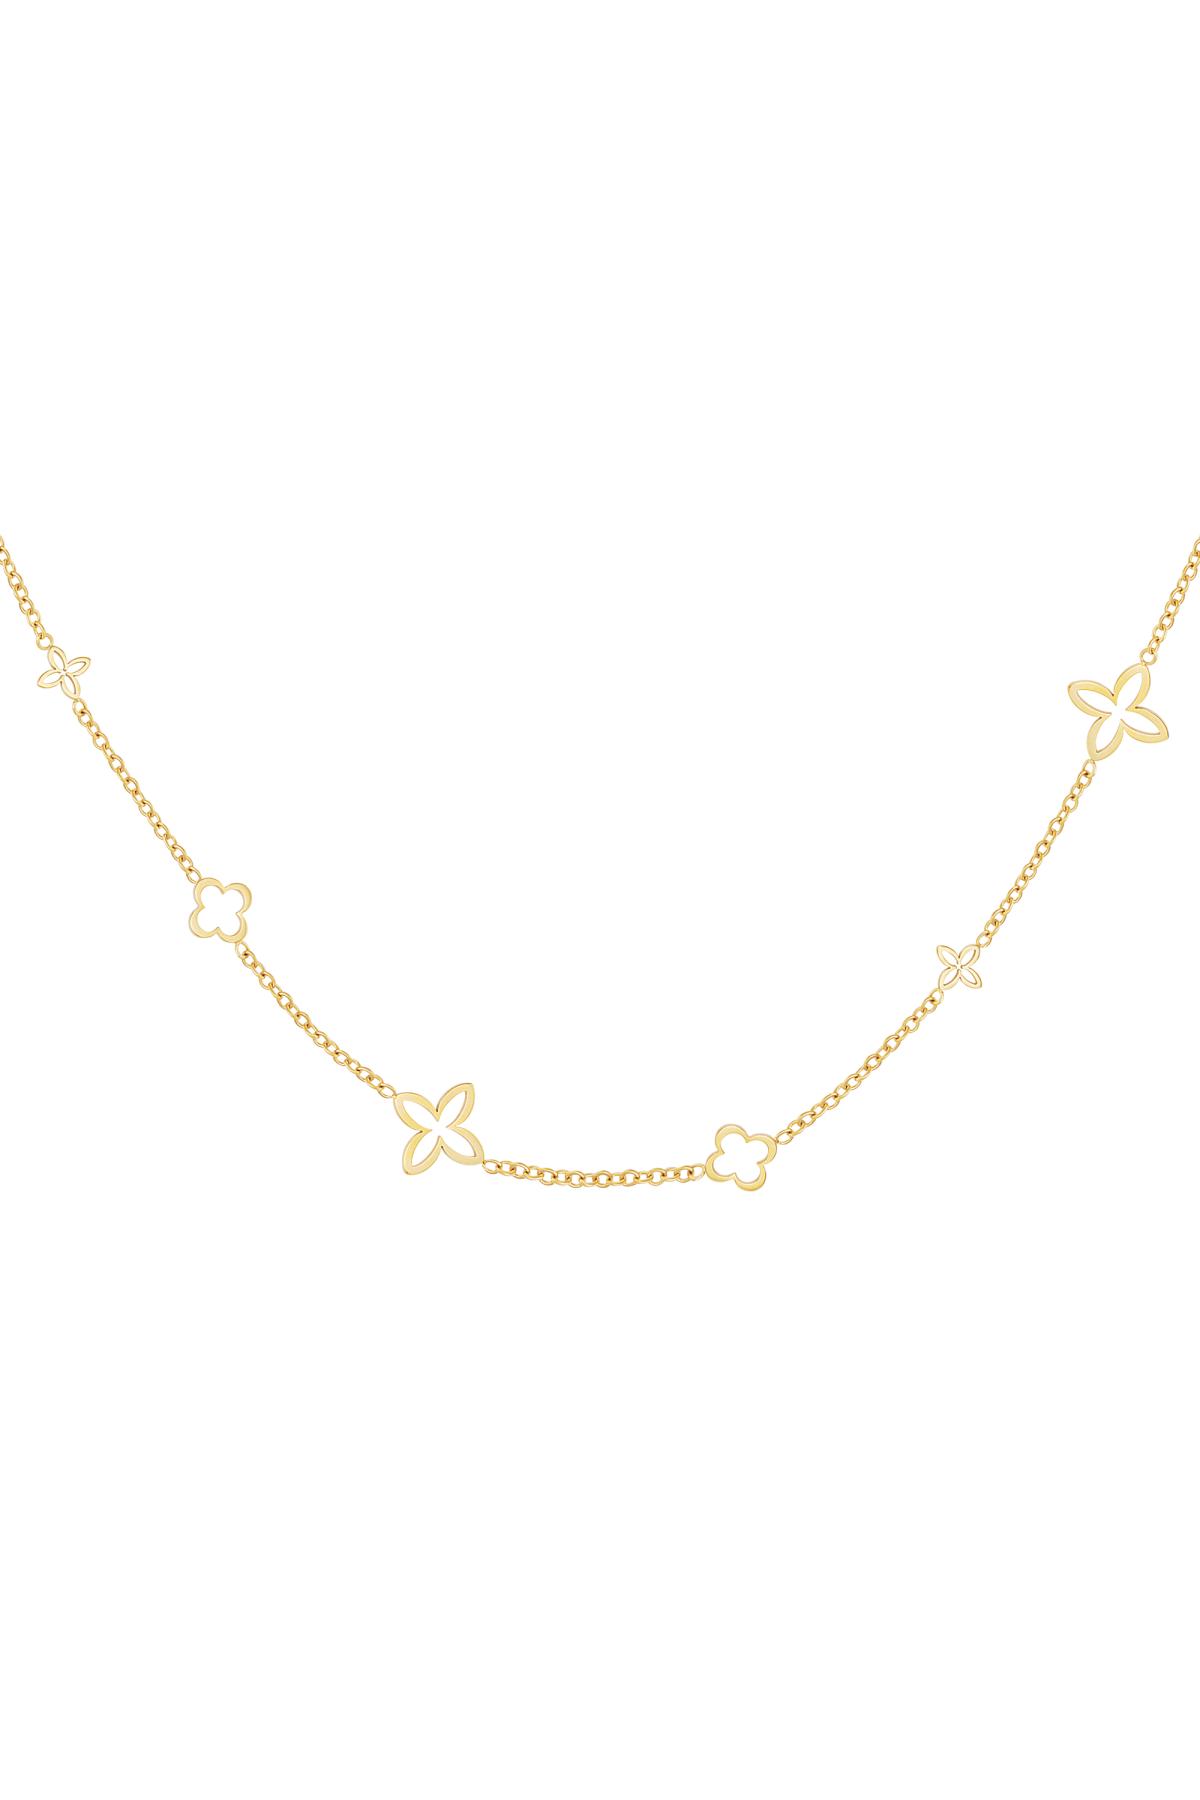 Minimalist charm necklace clovers Gold Stainless Steel h5 